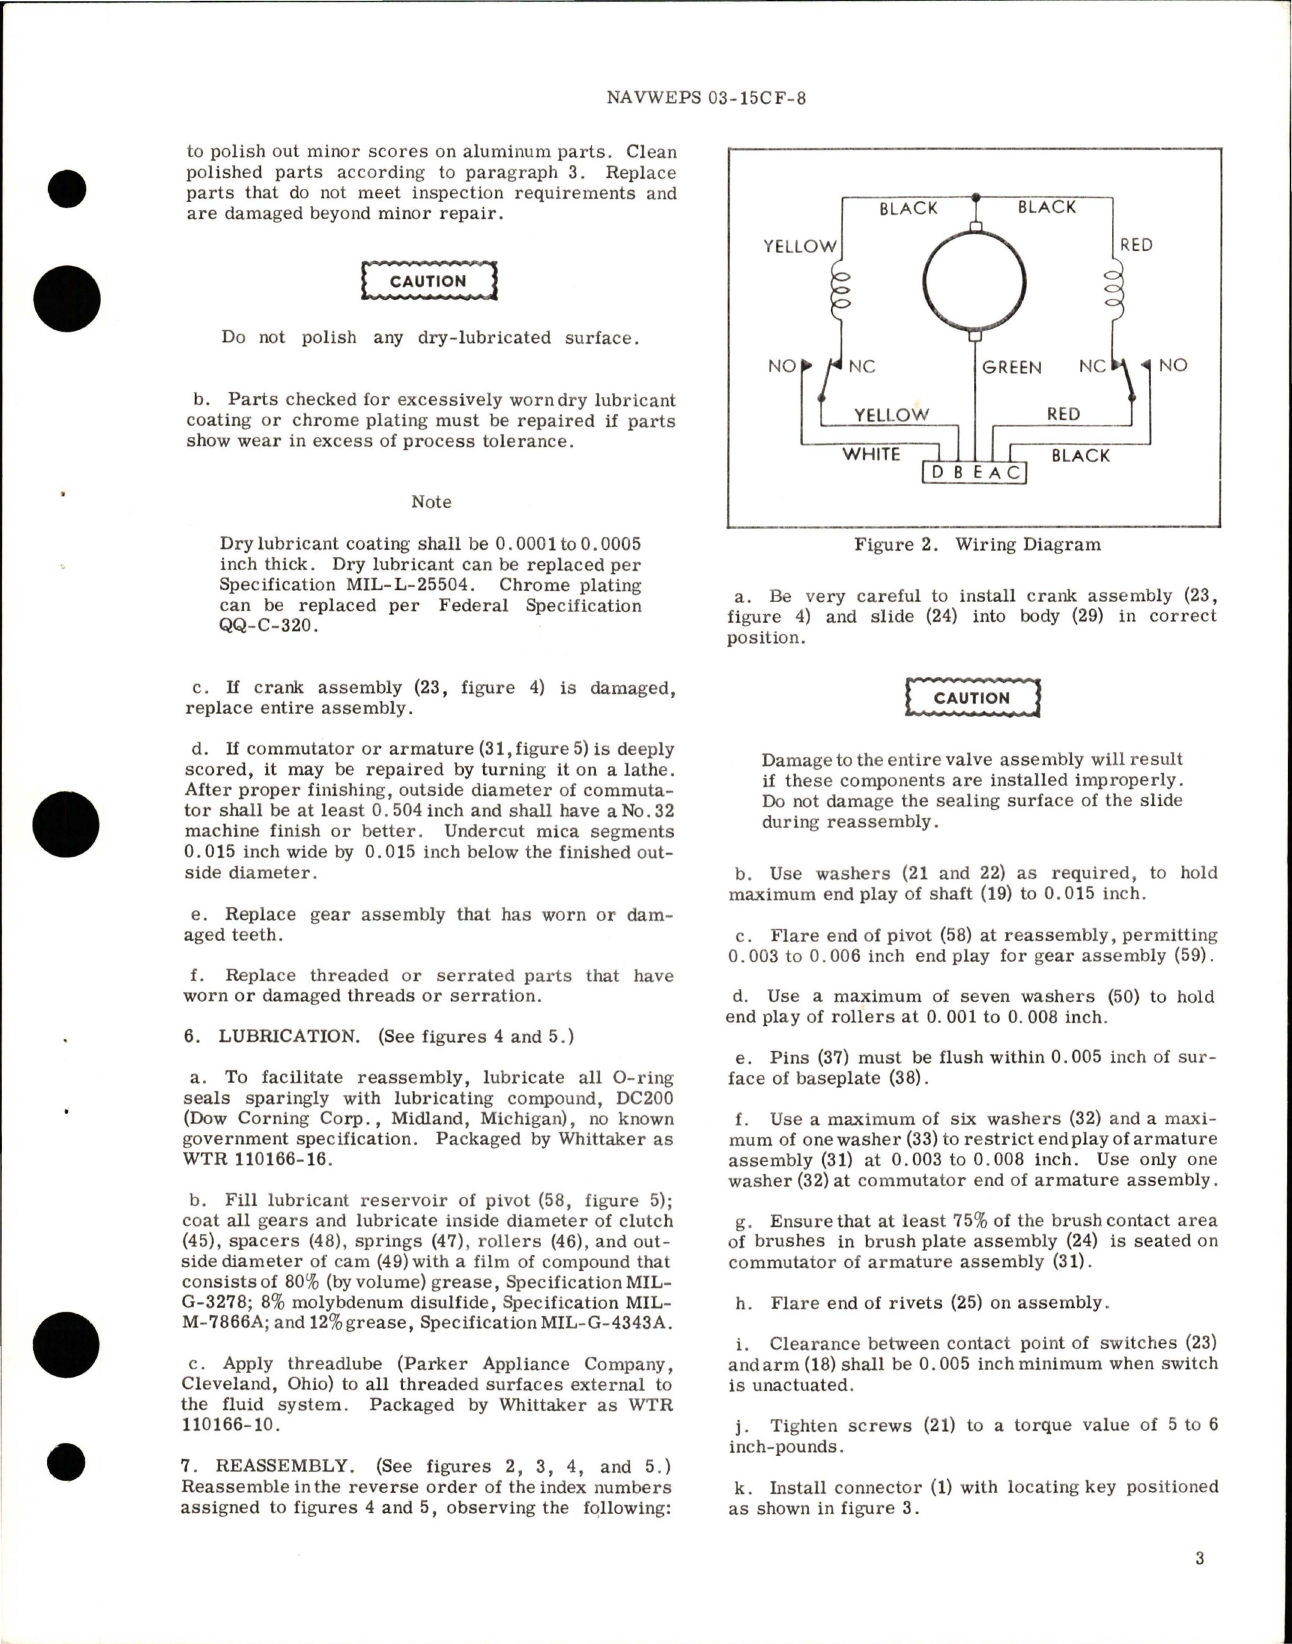 Sample page 5 from AirCorps Library document: Overhaul Instructions with Illustrated Parts Breakdown for Motor Actuated Gate Shutoff Valve - Part 134415-5